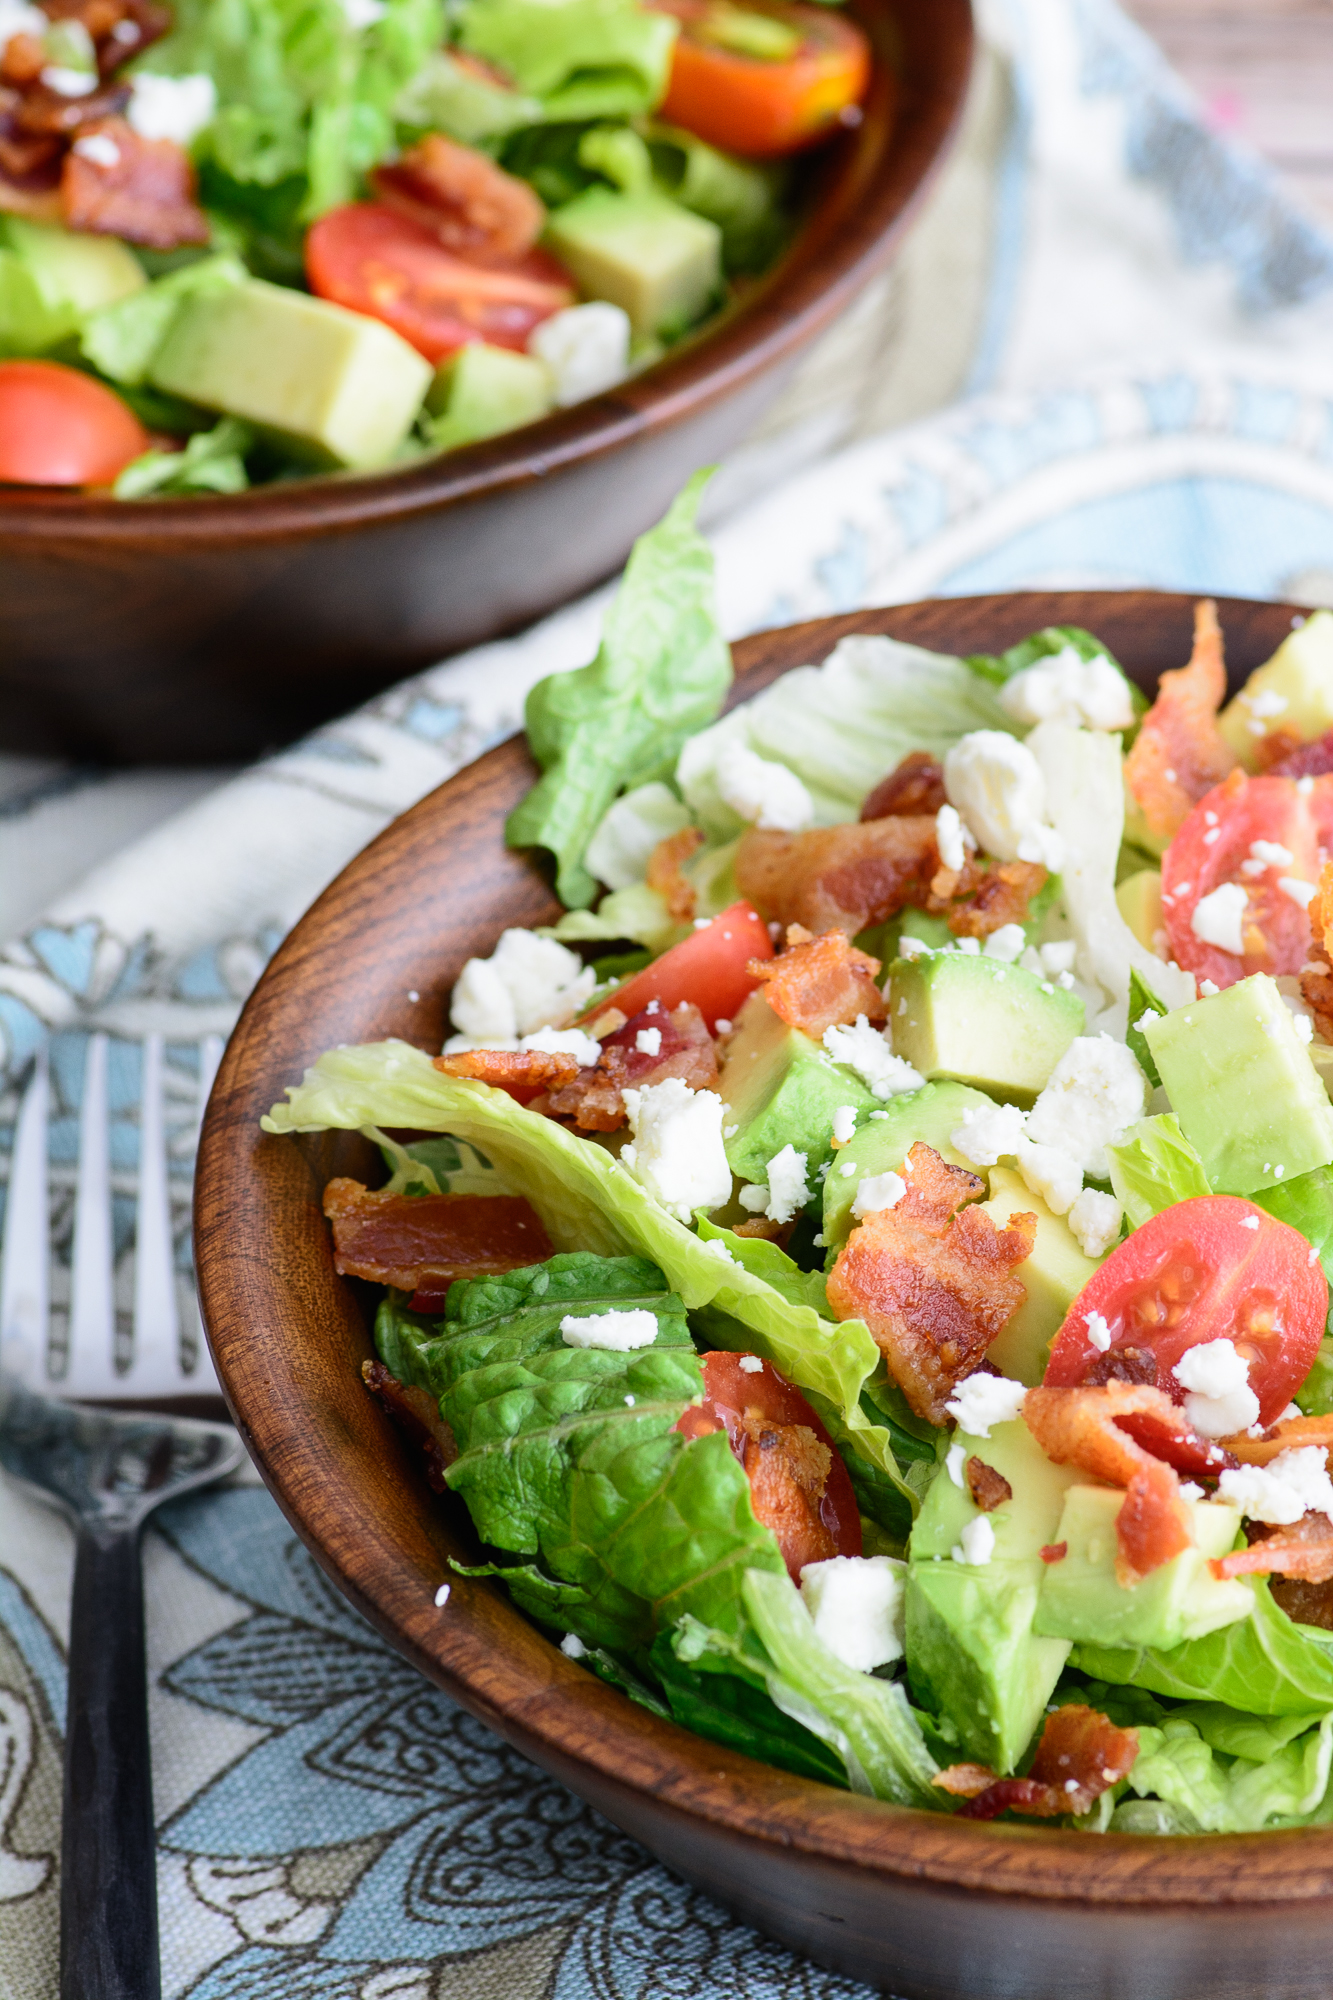 This salad recipe has all the robust flavor of a BLT without the carbs! This paleo, gluten free and low-carb recipe is so delicious, you won't even miss the bread!